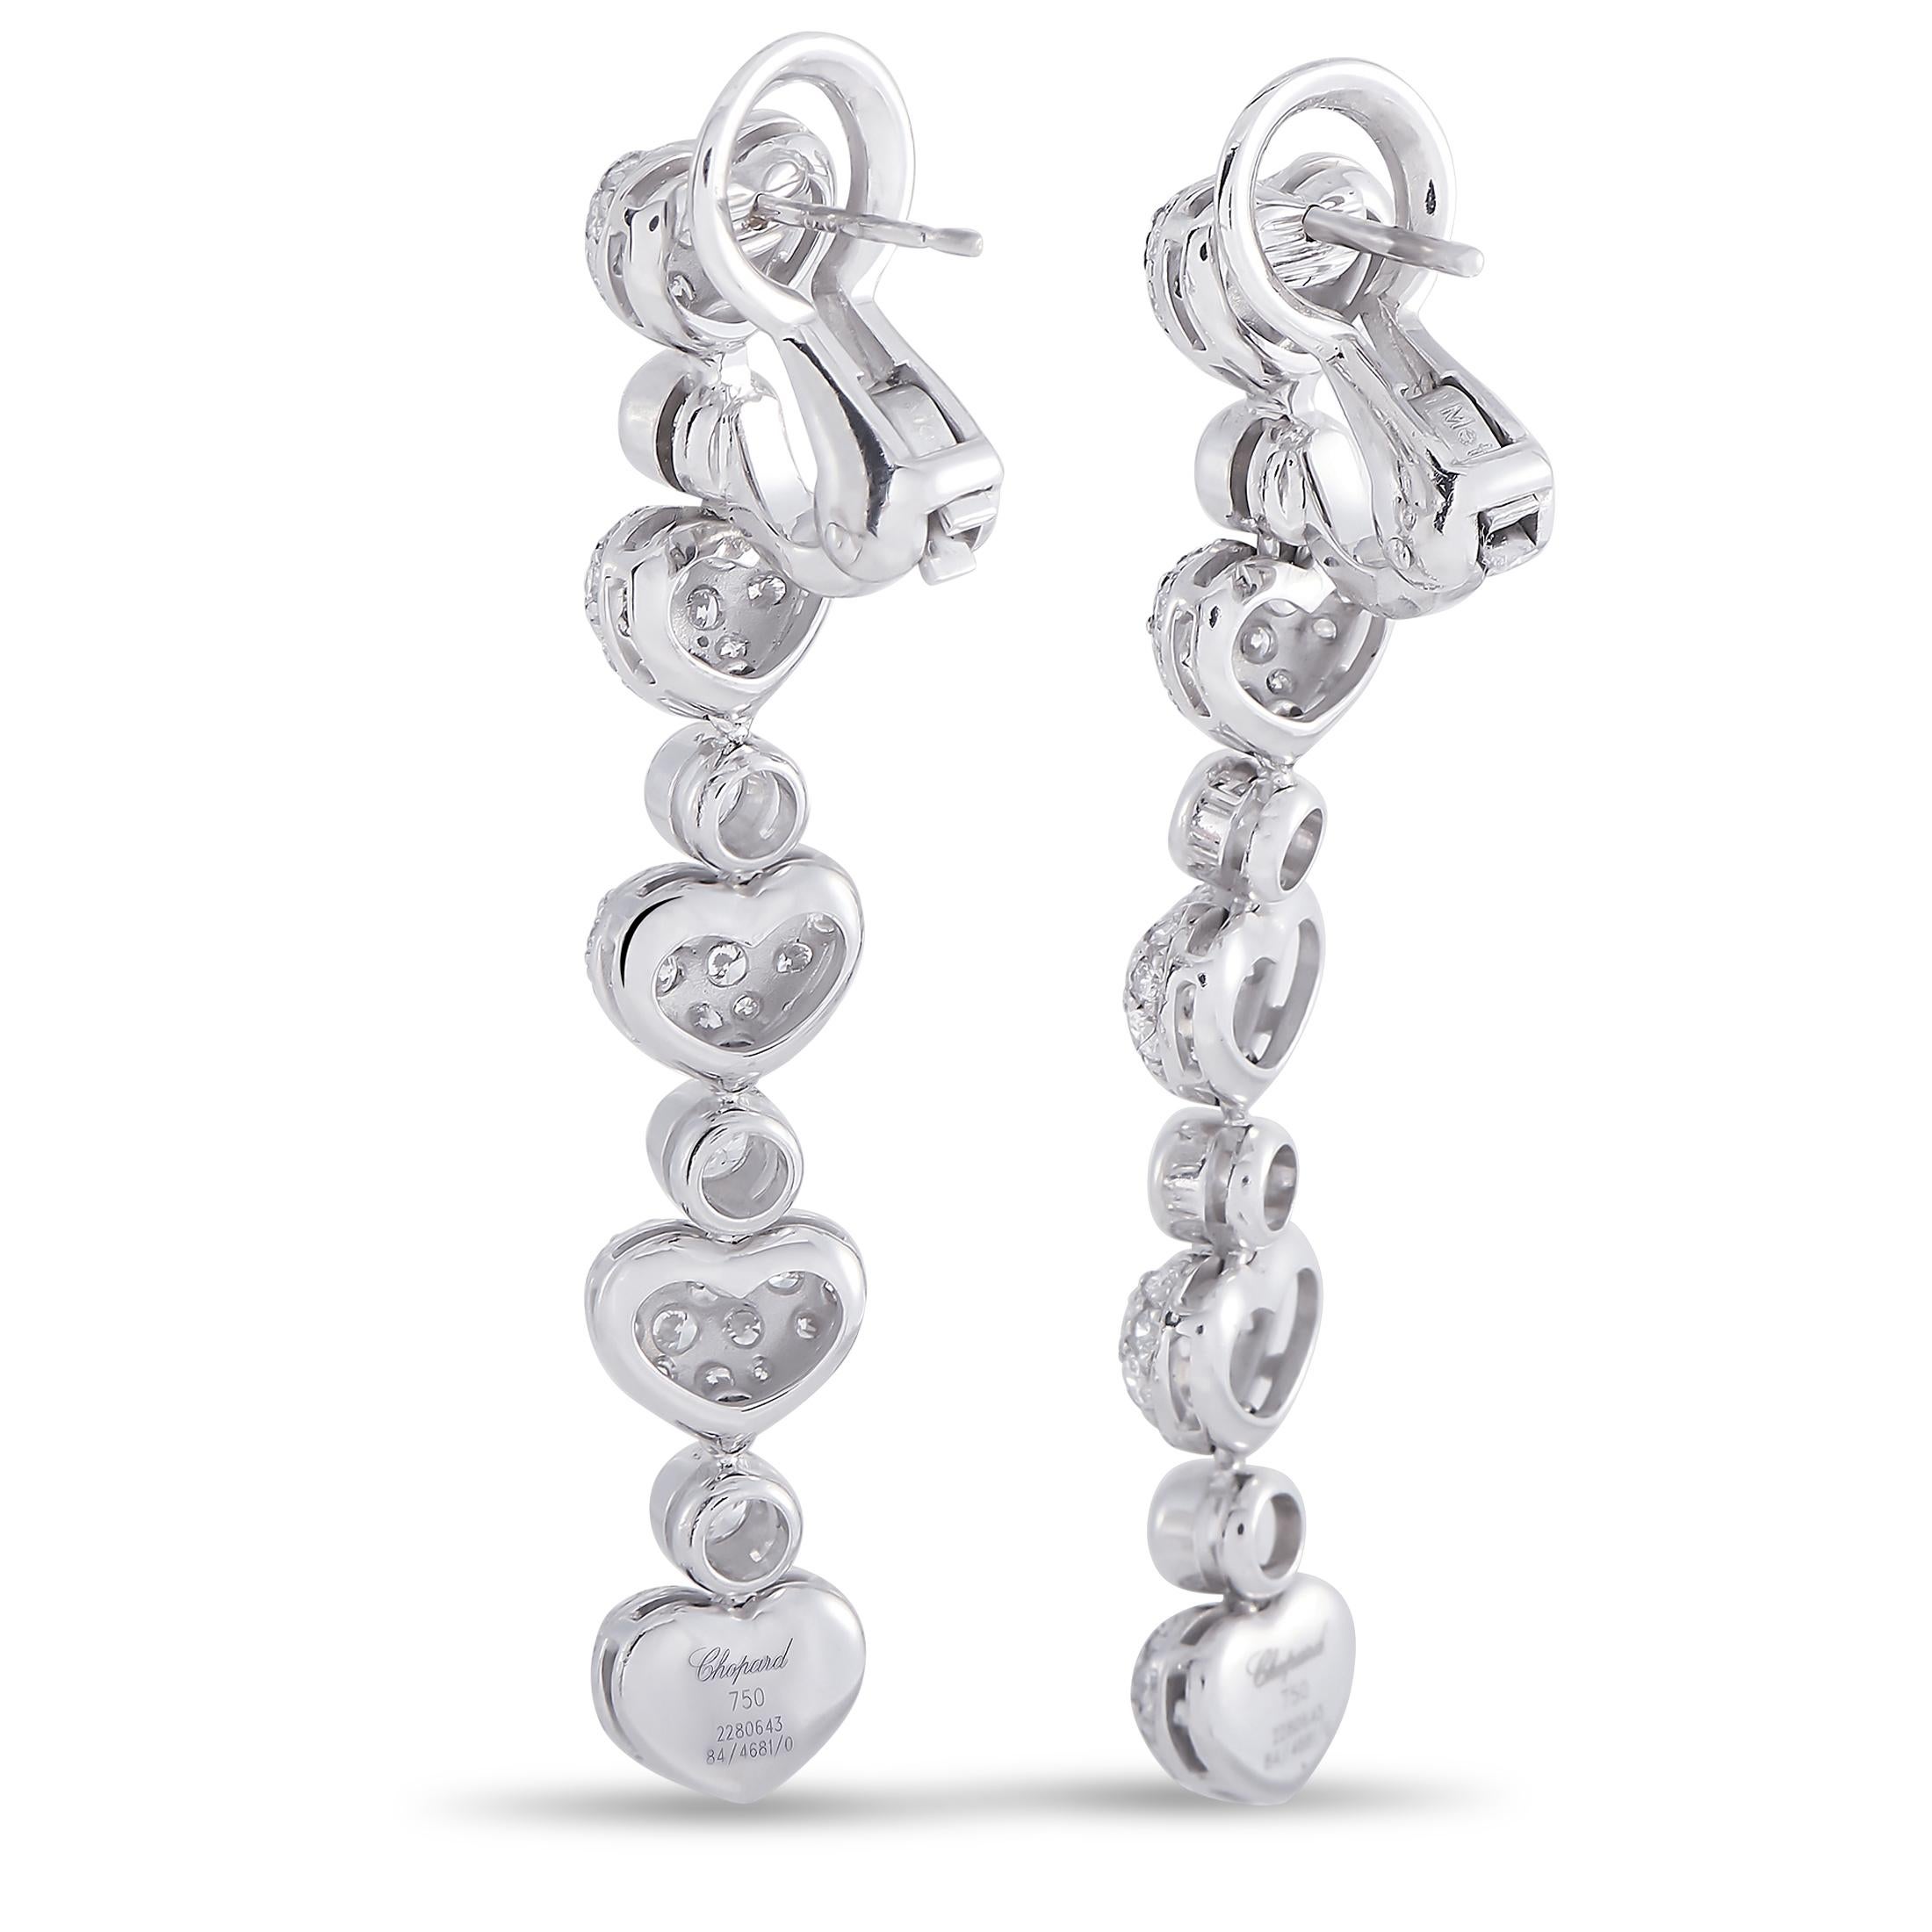 These Chopard earrings with heart motifs are crafted from 18K white gold and each of the two weighs 7.4 grams. They measure 2” in length and 0.37” in width. The pair is set with diamonds that boast E color and VVS clarity and total 3.70 carats.

The